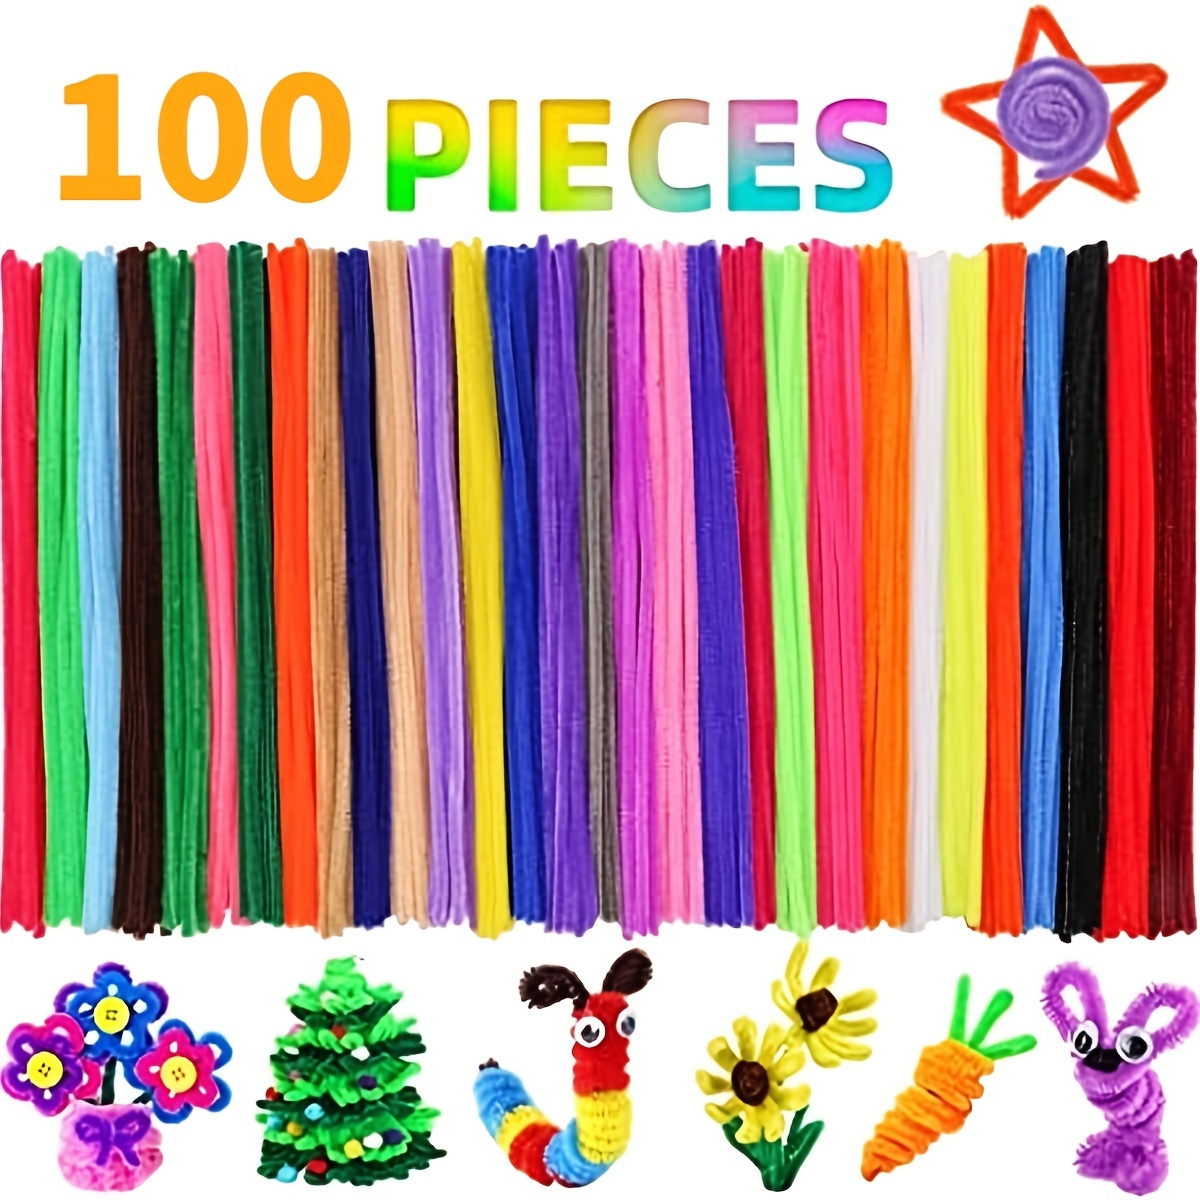 10 Different Colors For Making Diy Art Project Decorations, Fuzzy